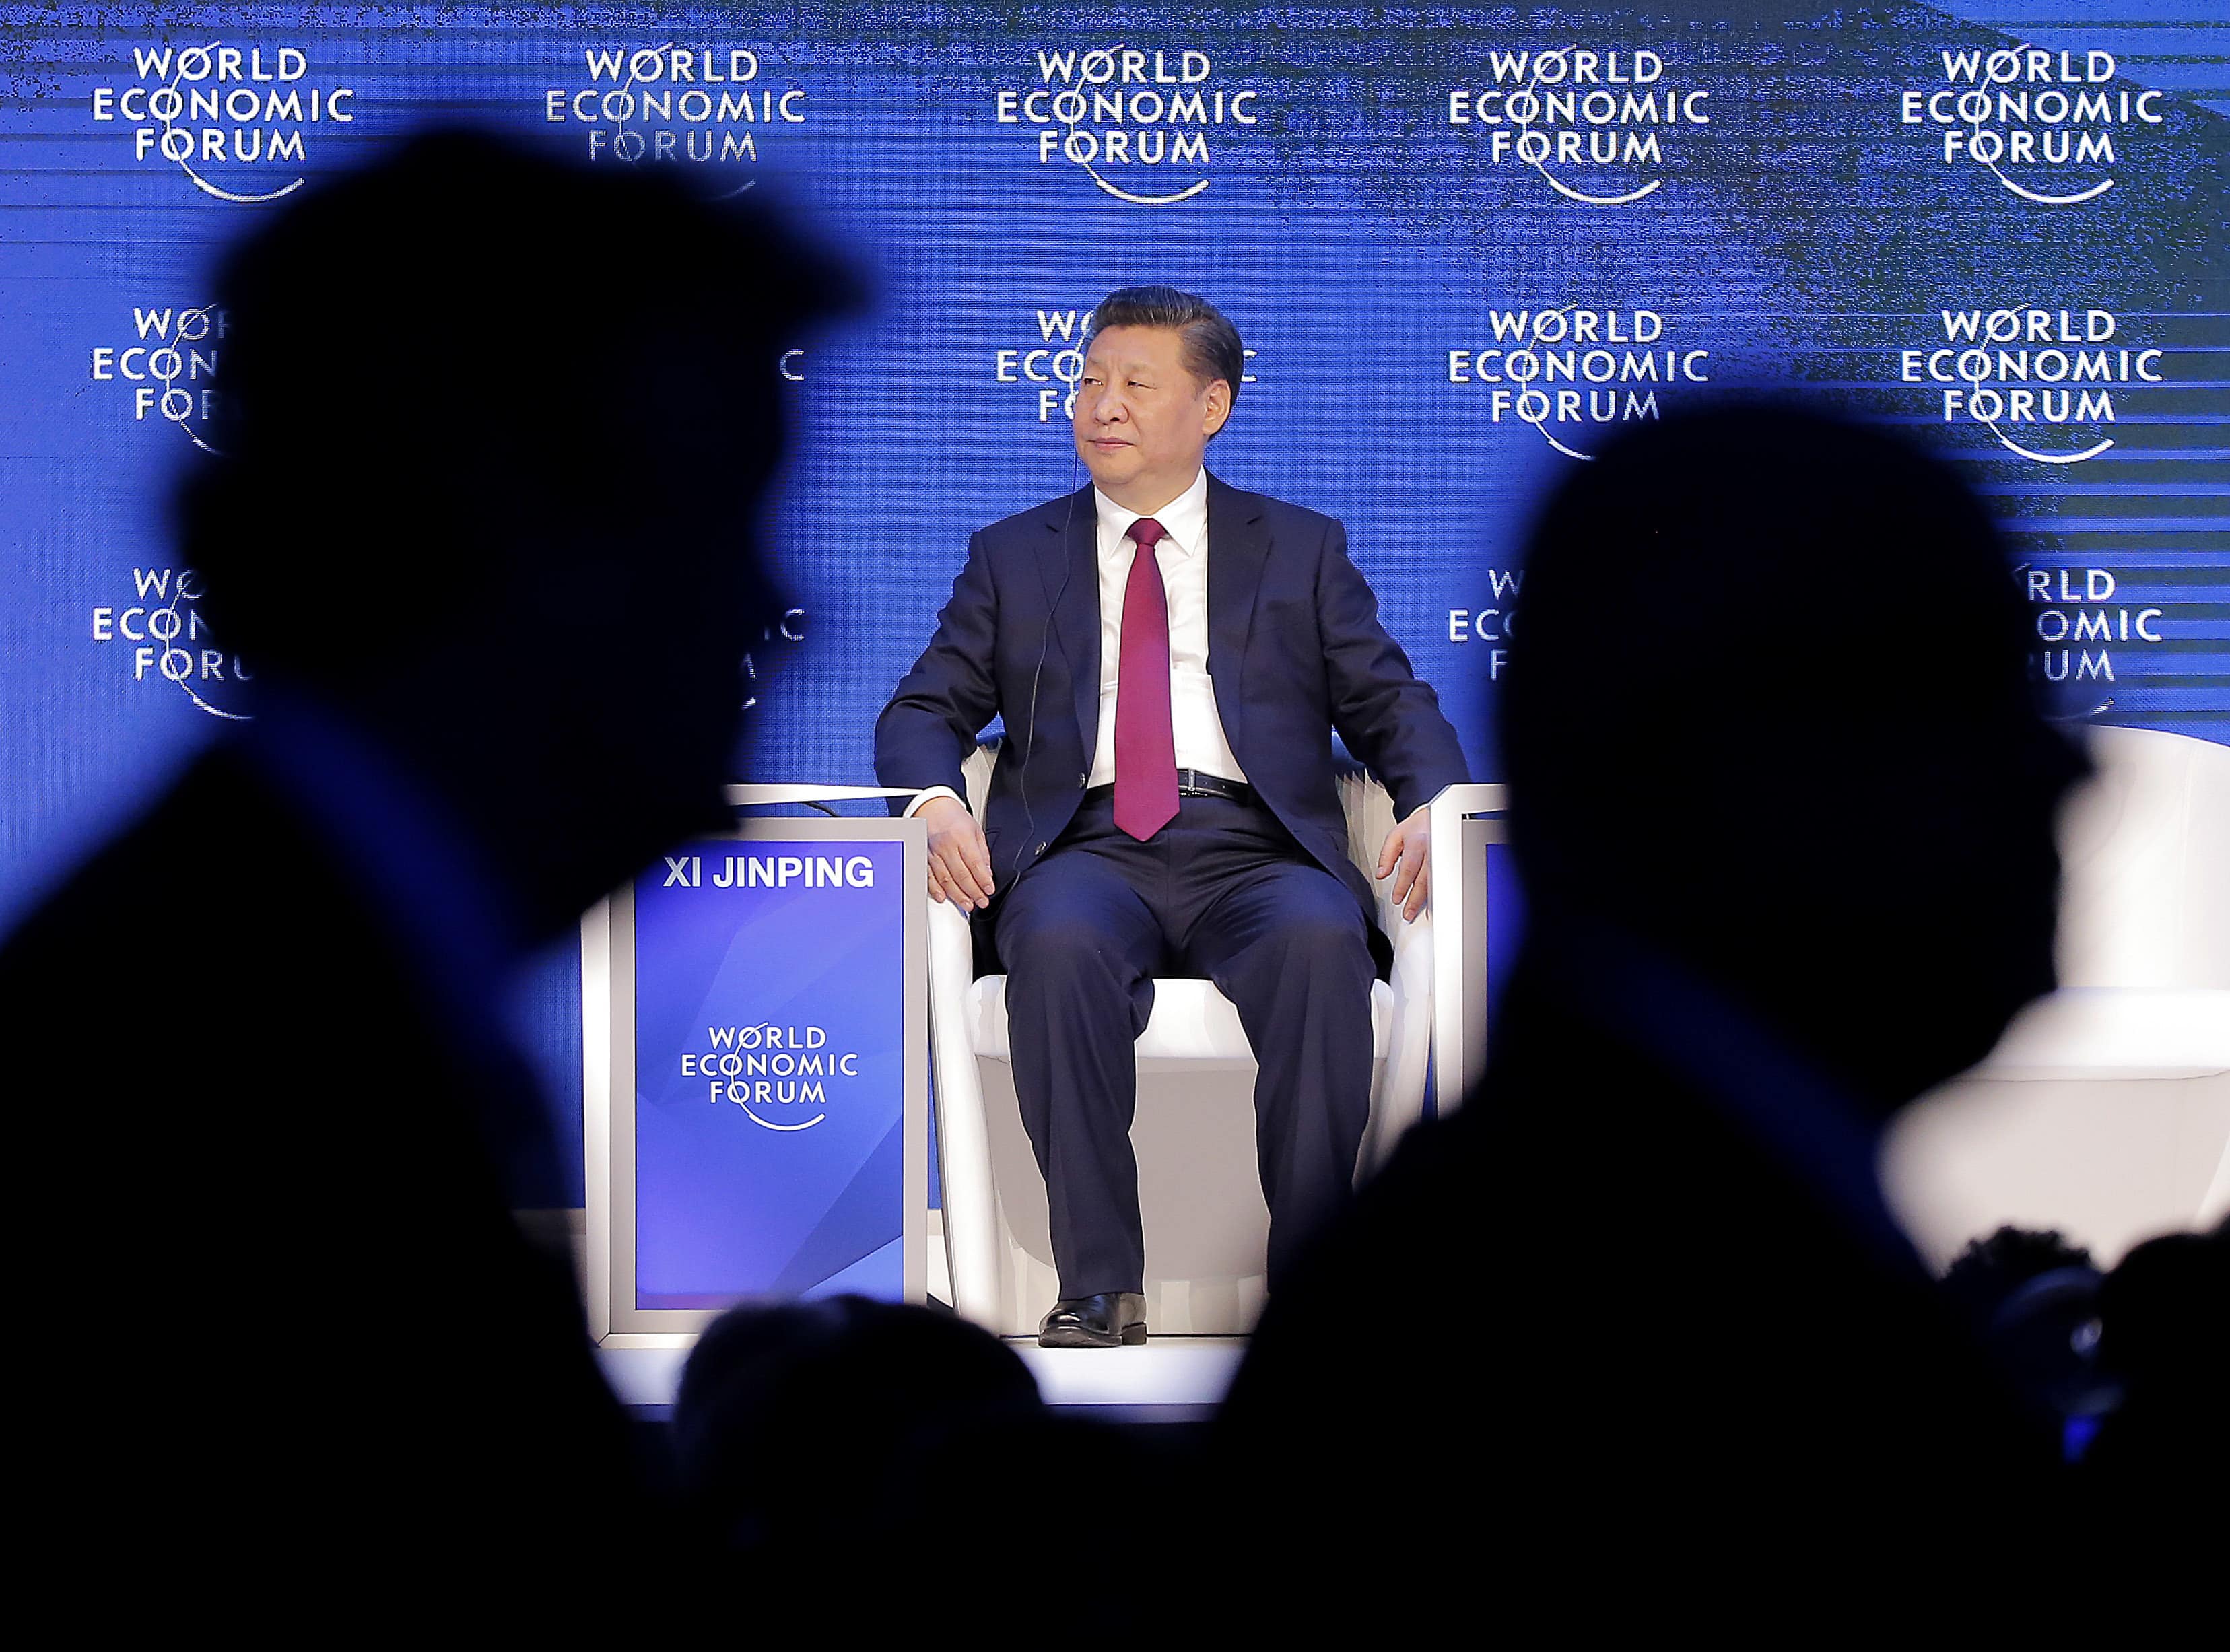 China's President Xi Jinping sits on the podium while people leave at the World Economic Forum in Davos, Switzerland, 17 January 2017, AP Photo/Michel Euler